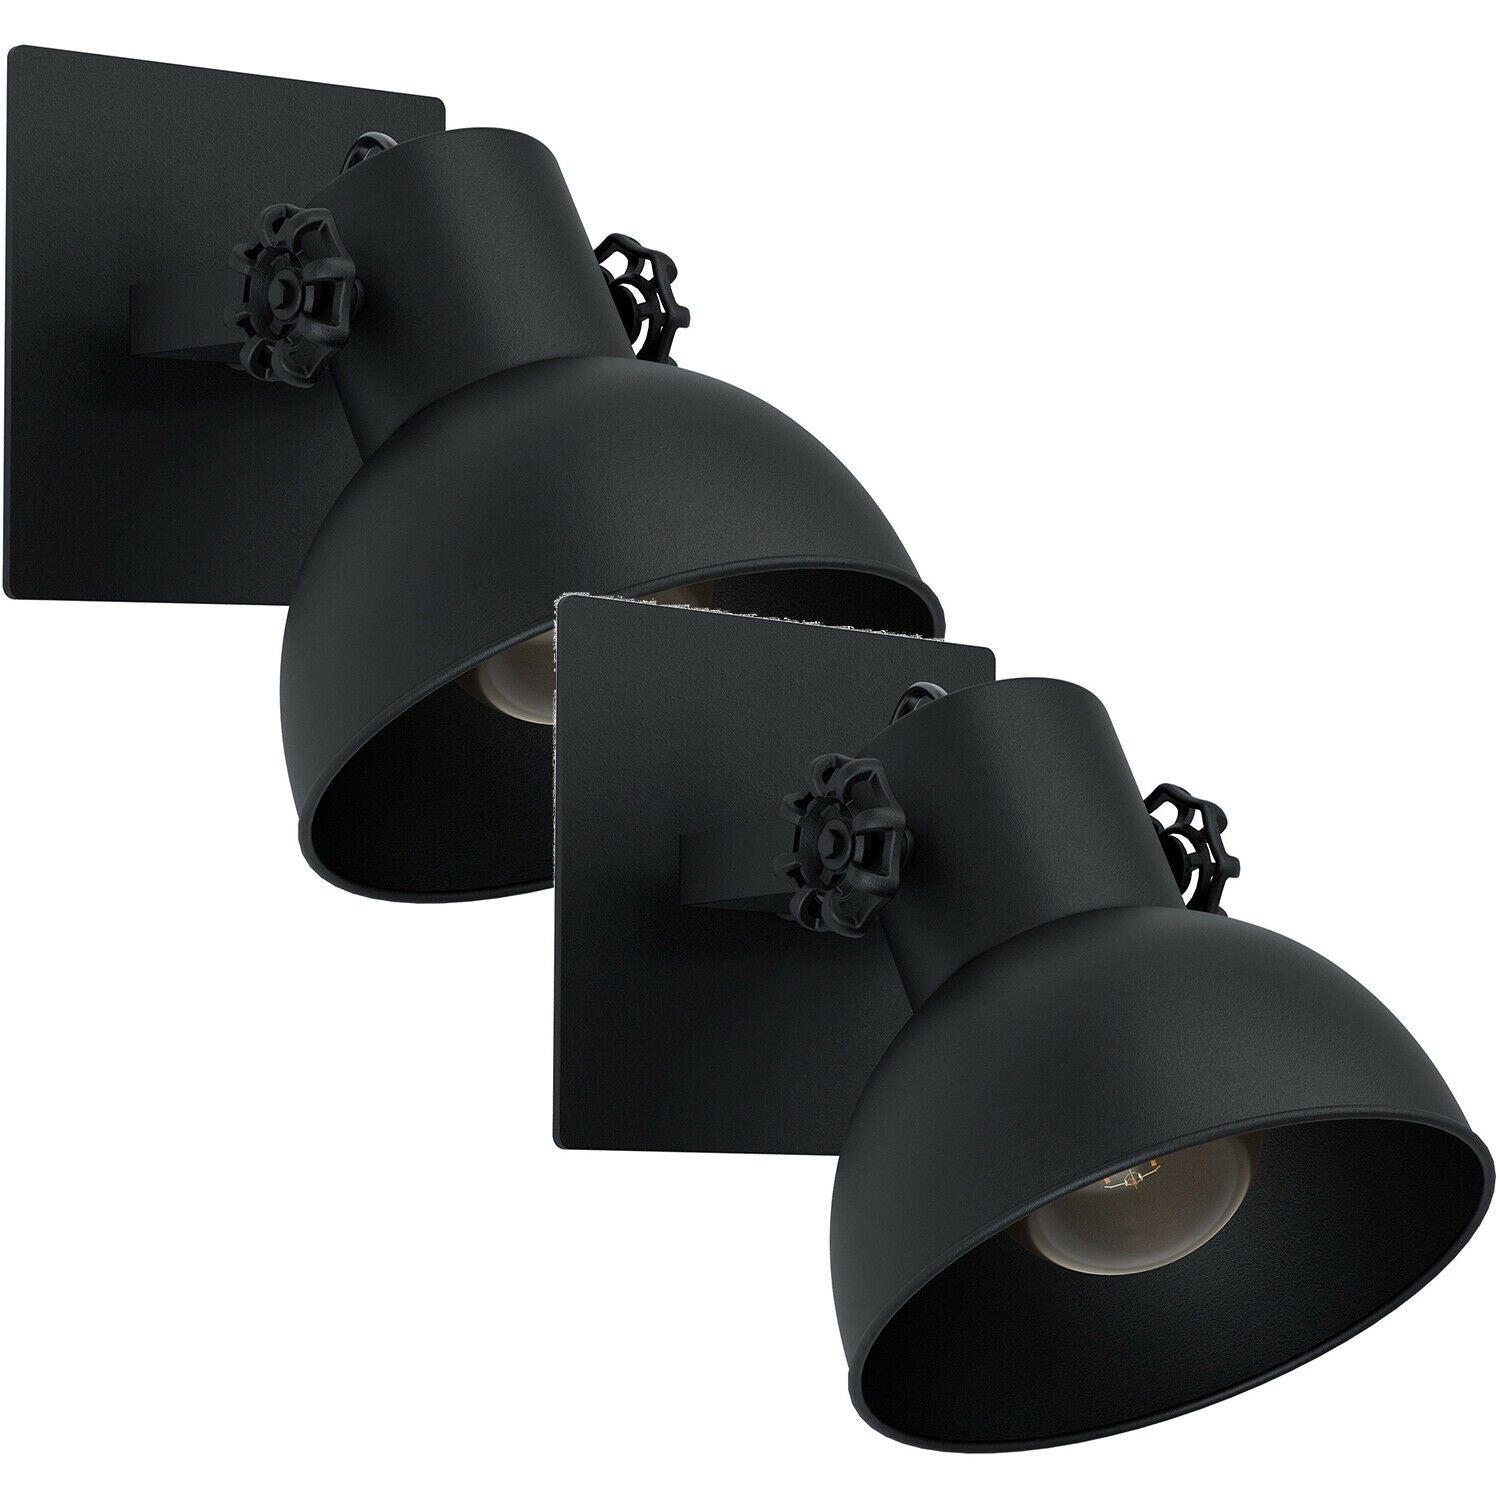 2 PACK LED Wall Light / Sconce Black Steel Adjustable Round Shade 1x 28W E27